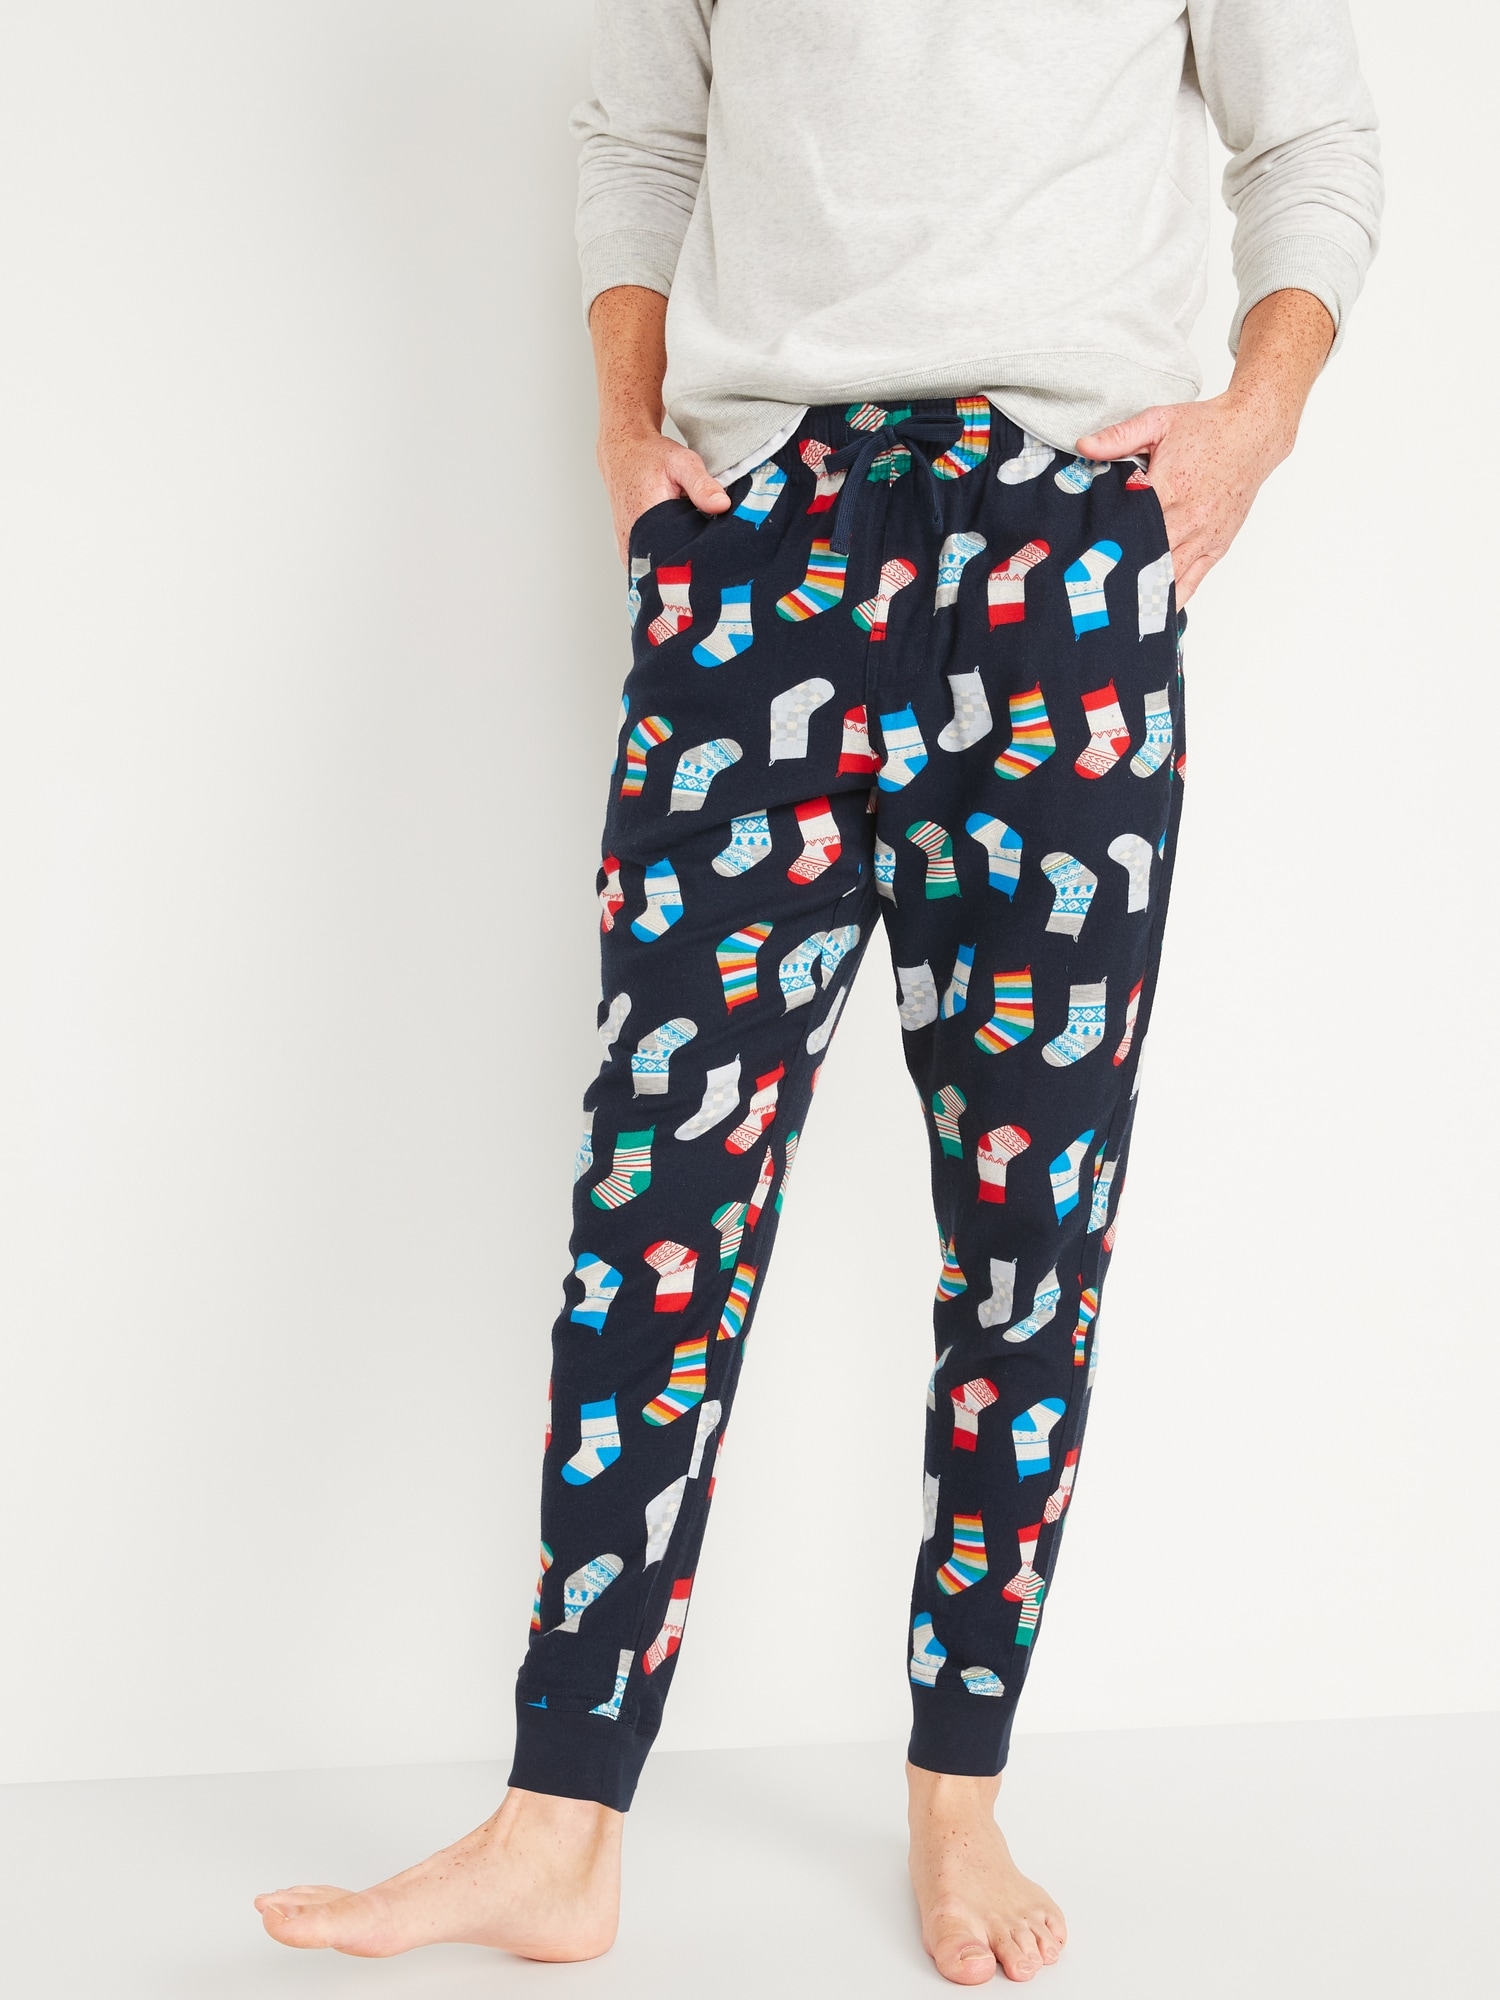 Old Navy Thermal PJ Leggings & Flannel Joggers just $10 Today Only!